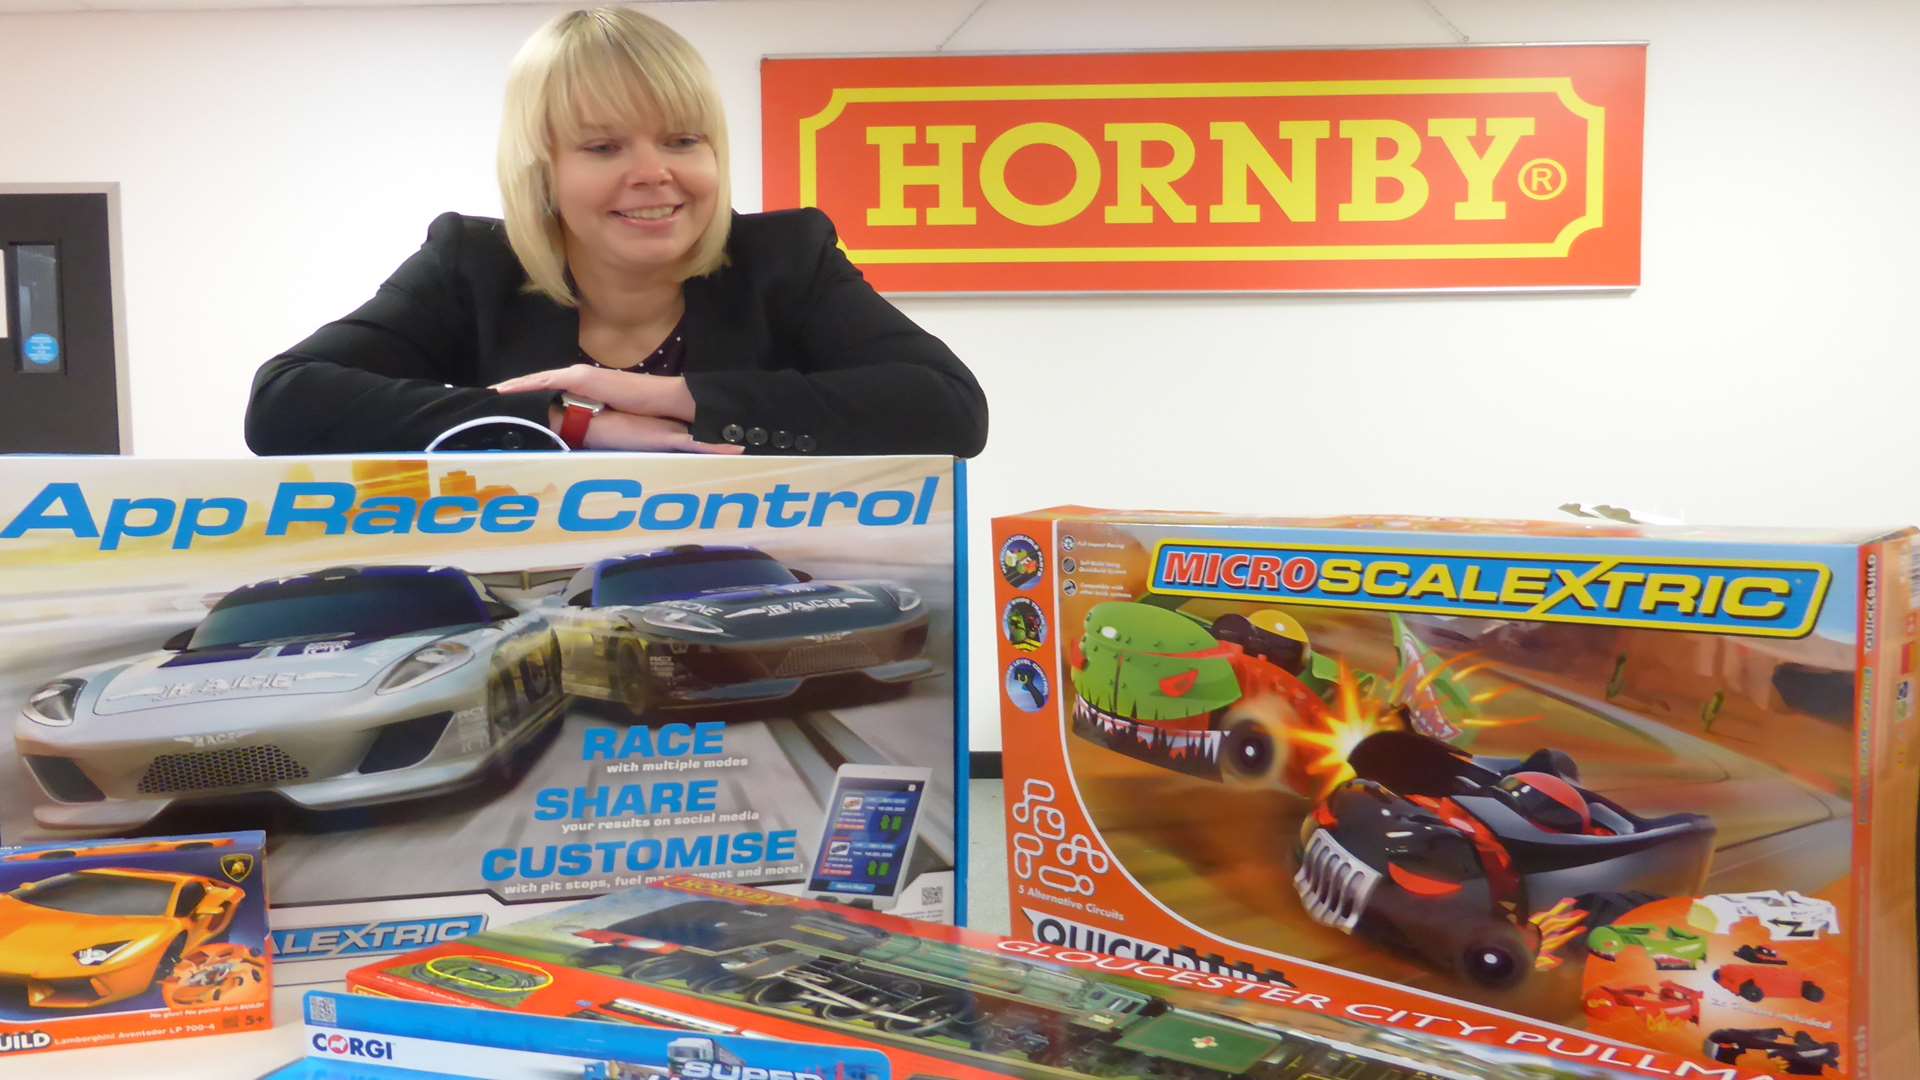 Lemon Creative lost contracts to designing packaging for various Hornby models and toys